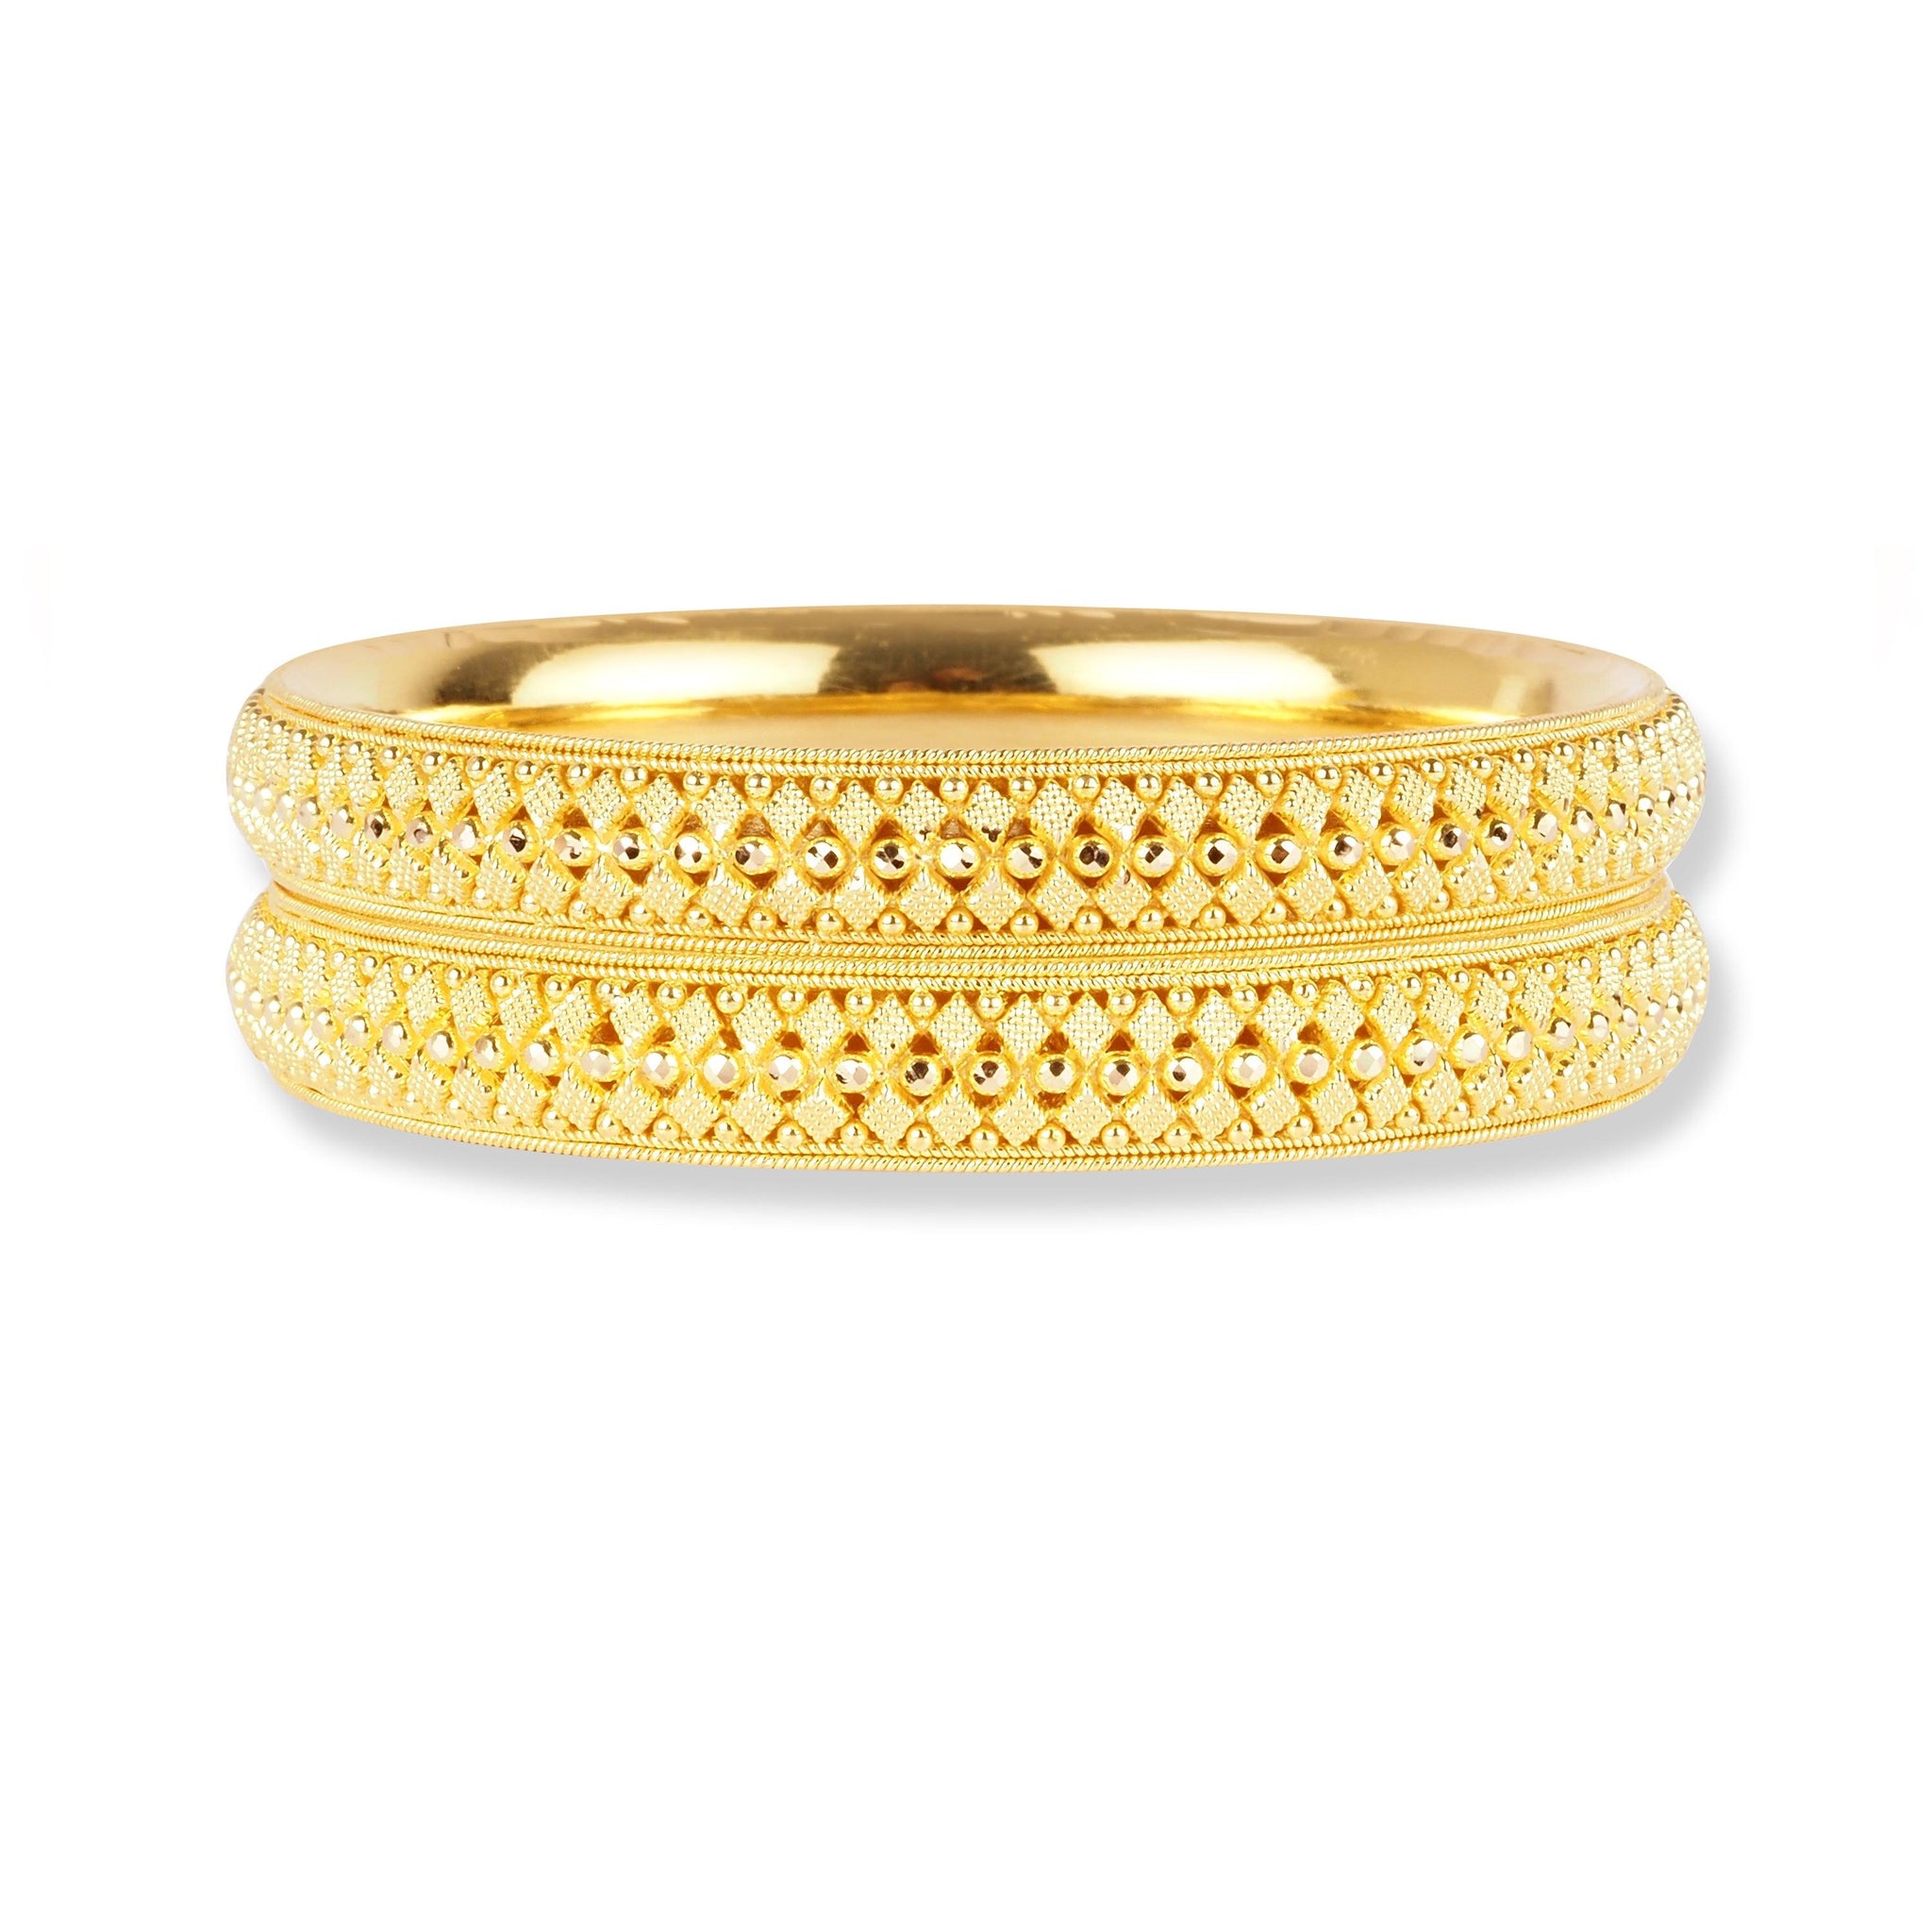 22ct Gold Set of Two Bangles with Filigree Work in Comfort Fit Finish B-8547